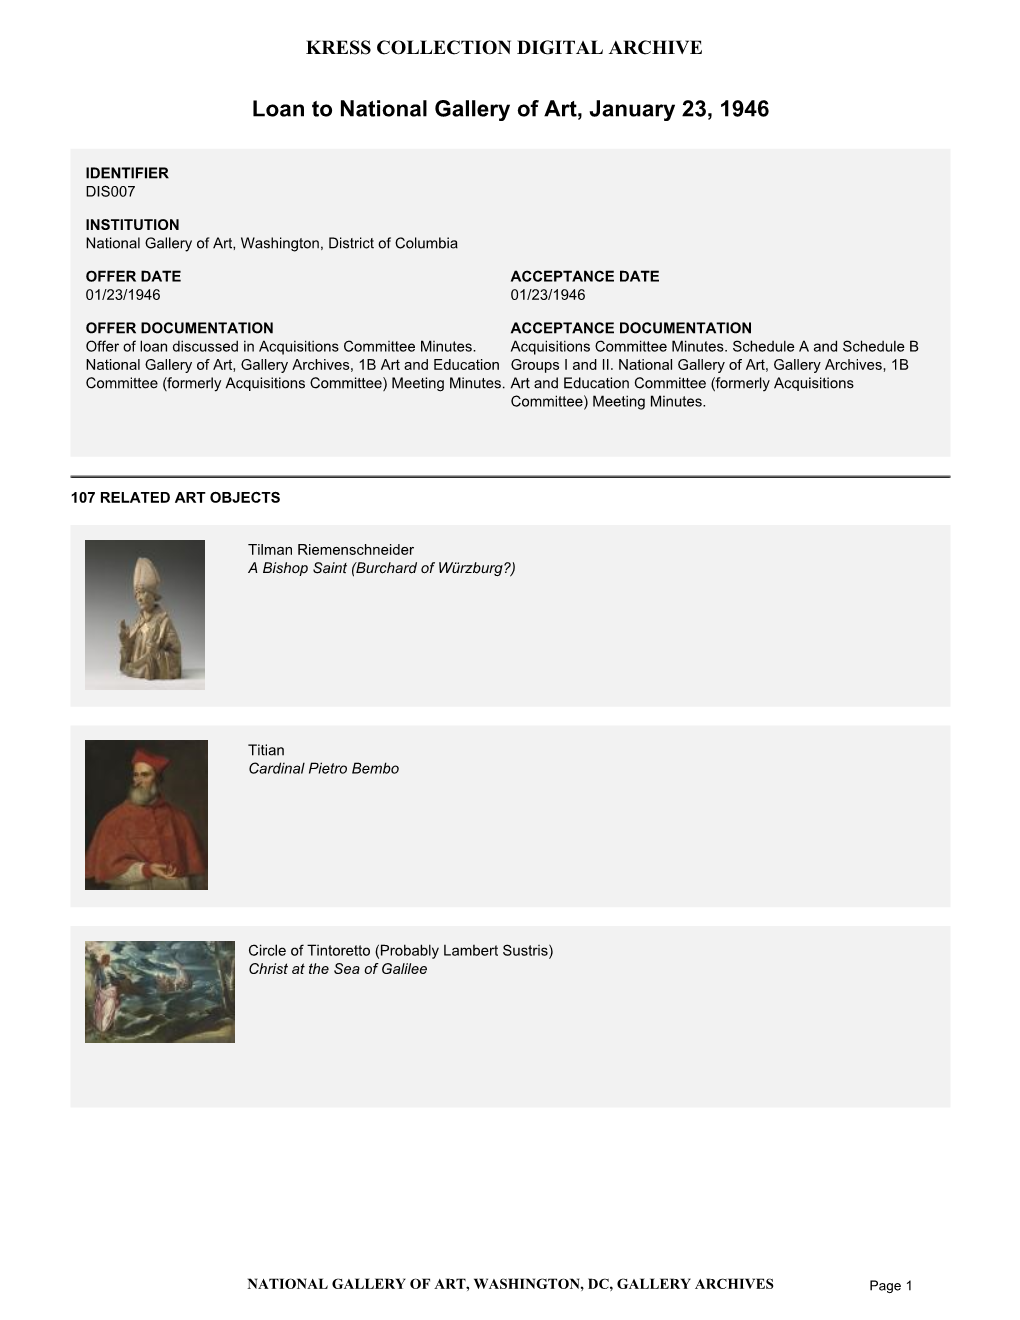 Summary for Loan to National Gallery Of